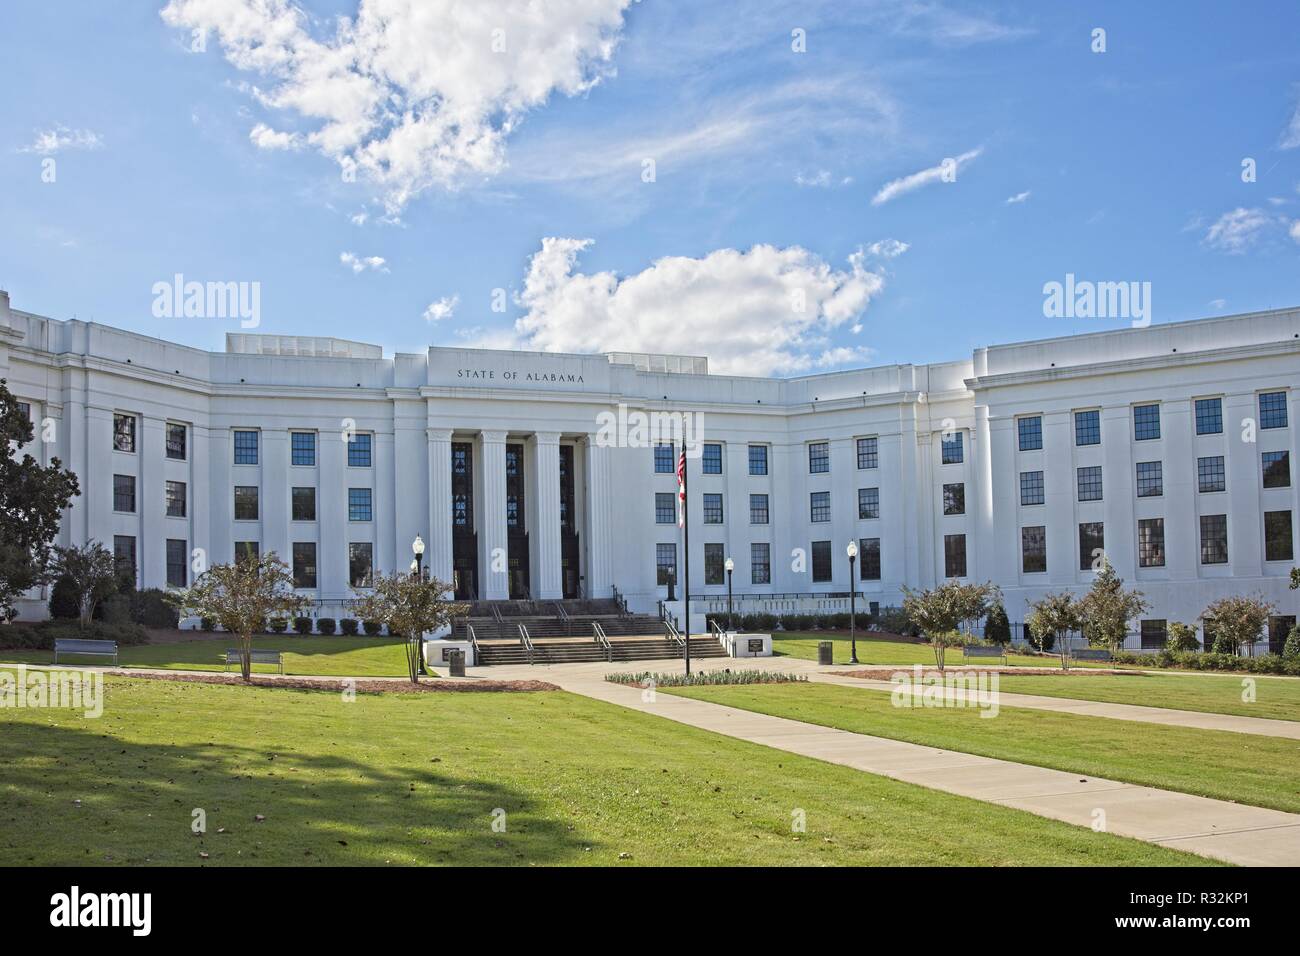 Alabama Attorney General's office building, a large state government building in the capitol city, Montgomery Alabama, USA. Stock Photo